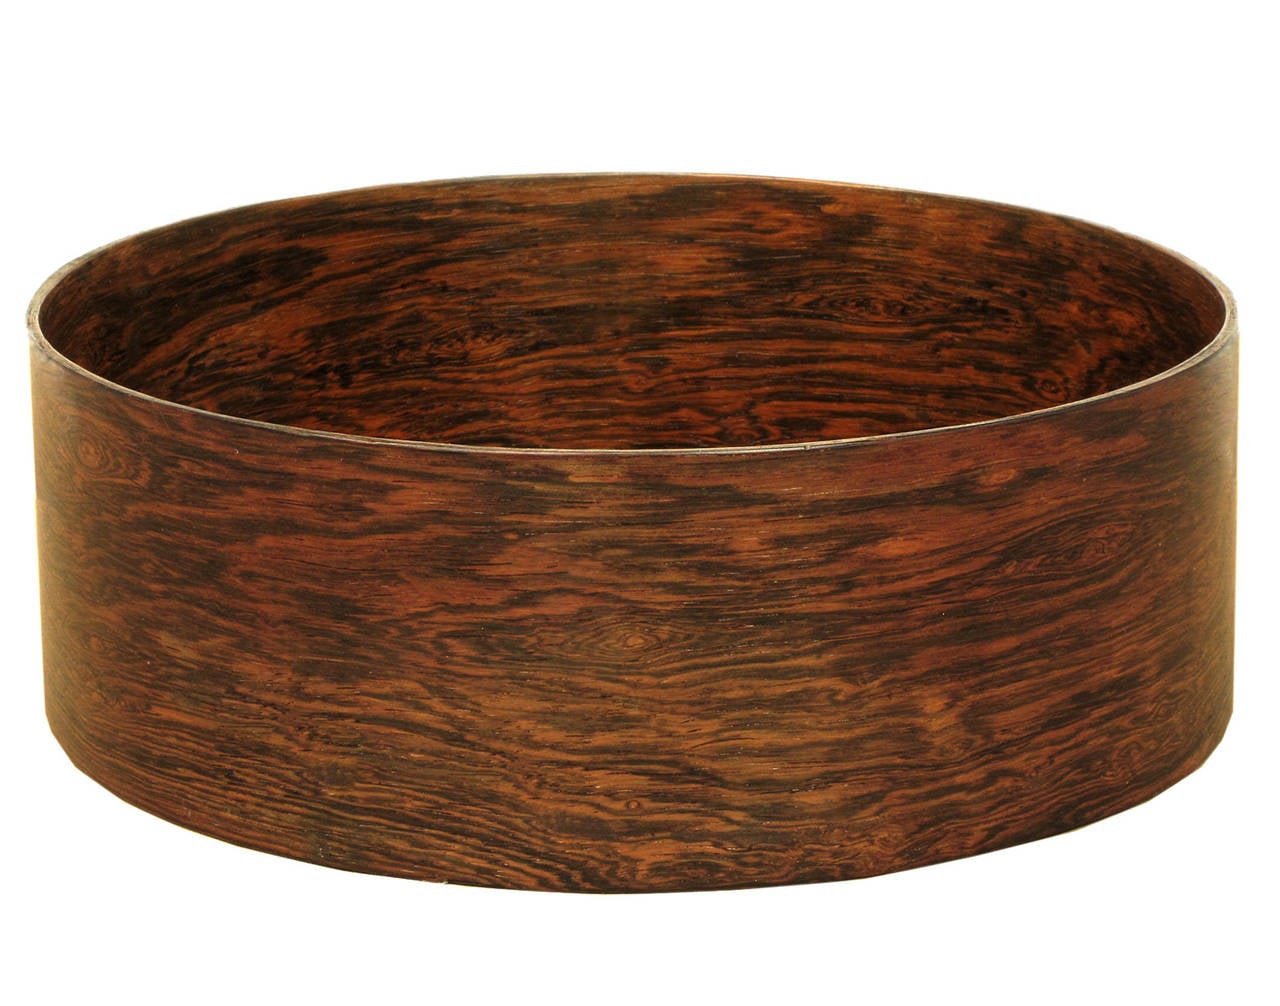 Mid-20th Century Large Cylindrical Brazilian Rosewood Bowl